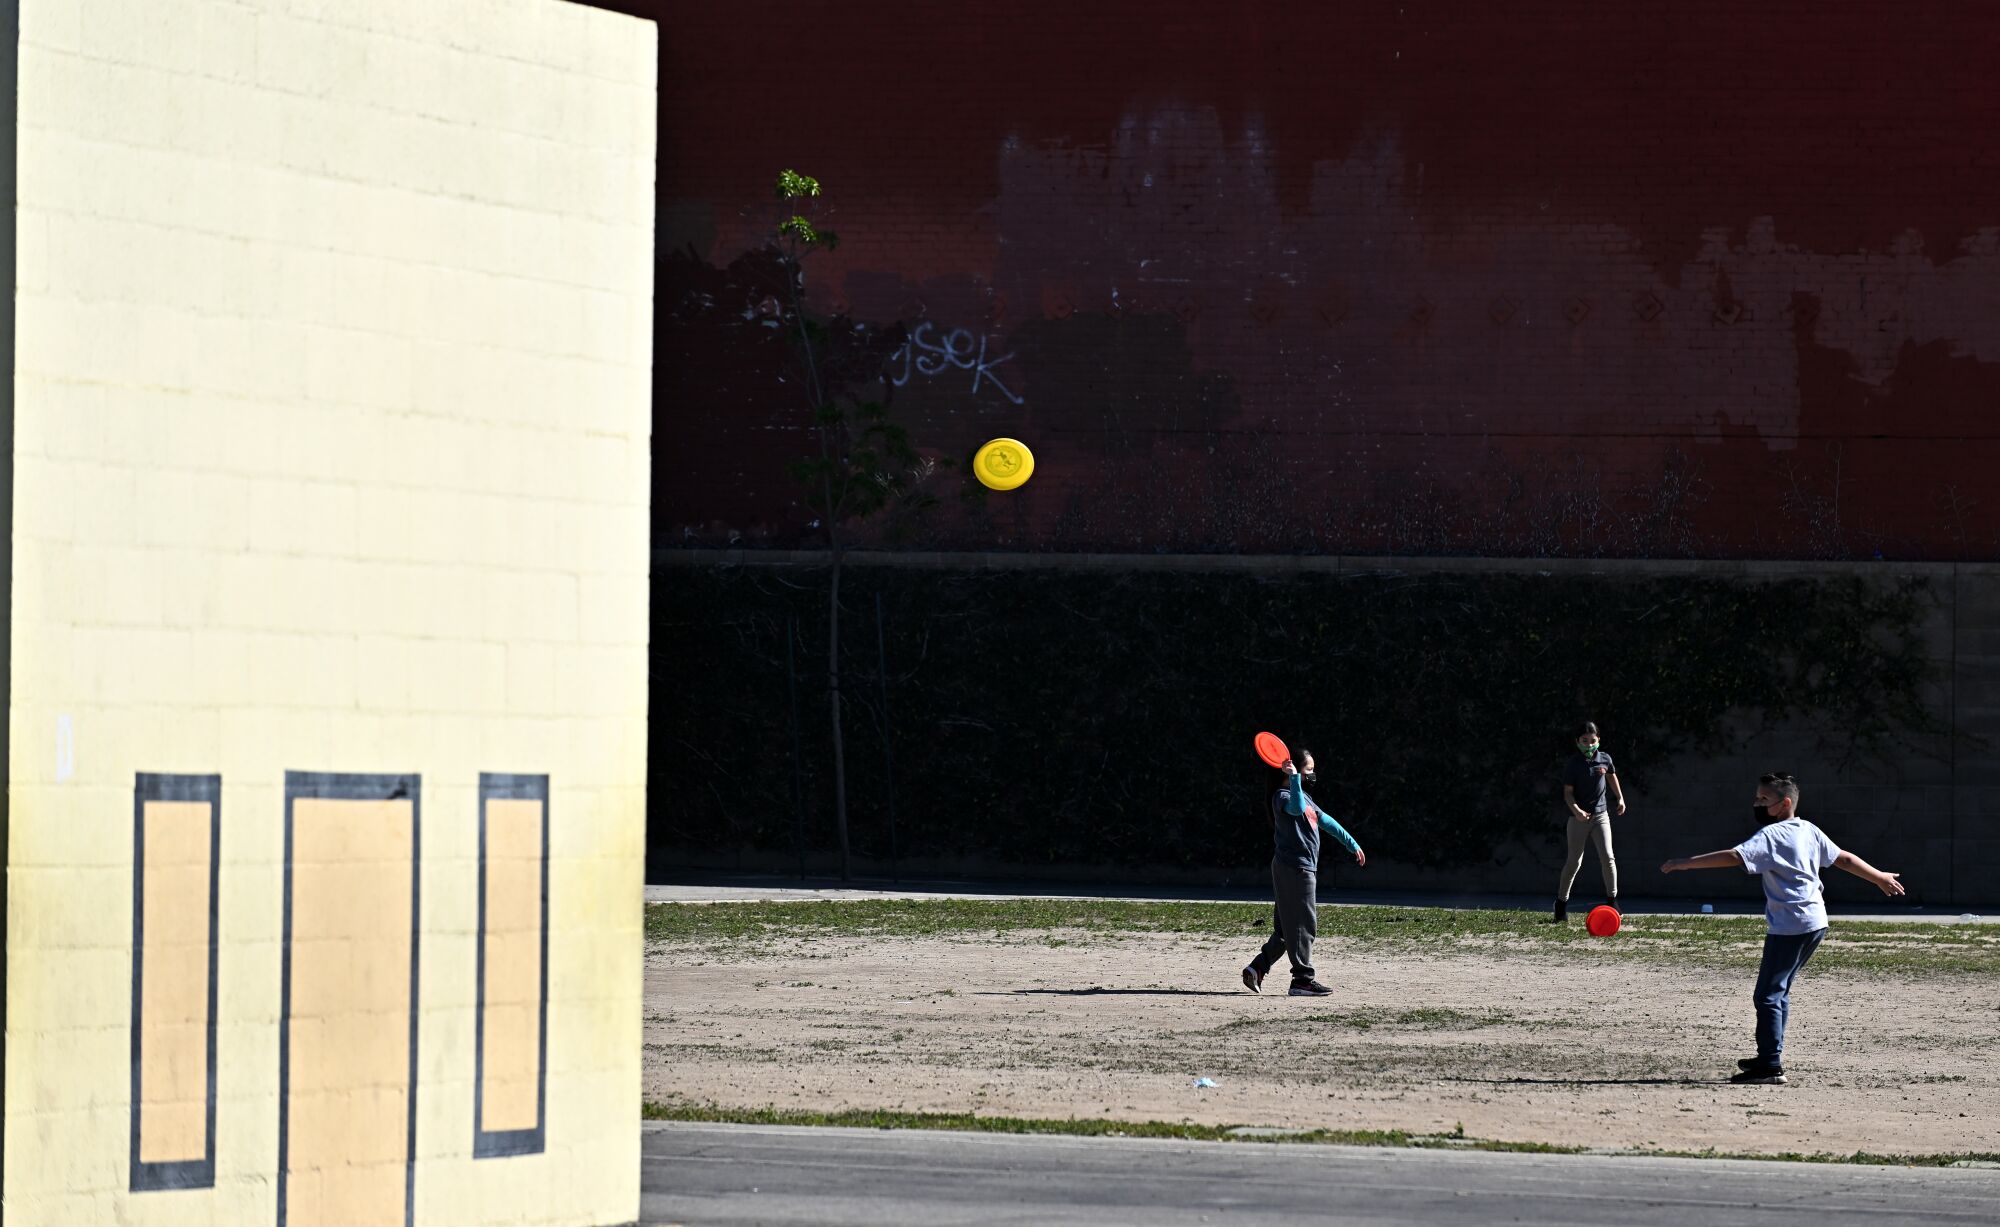 Kids playing with frisbees in a grass-less open field next to a playground wall at a school.